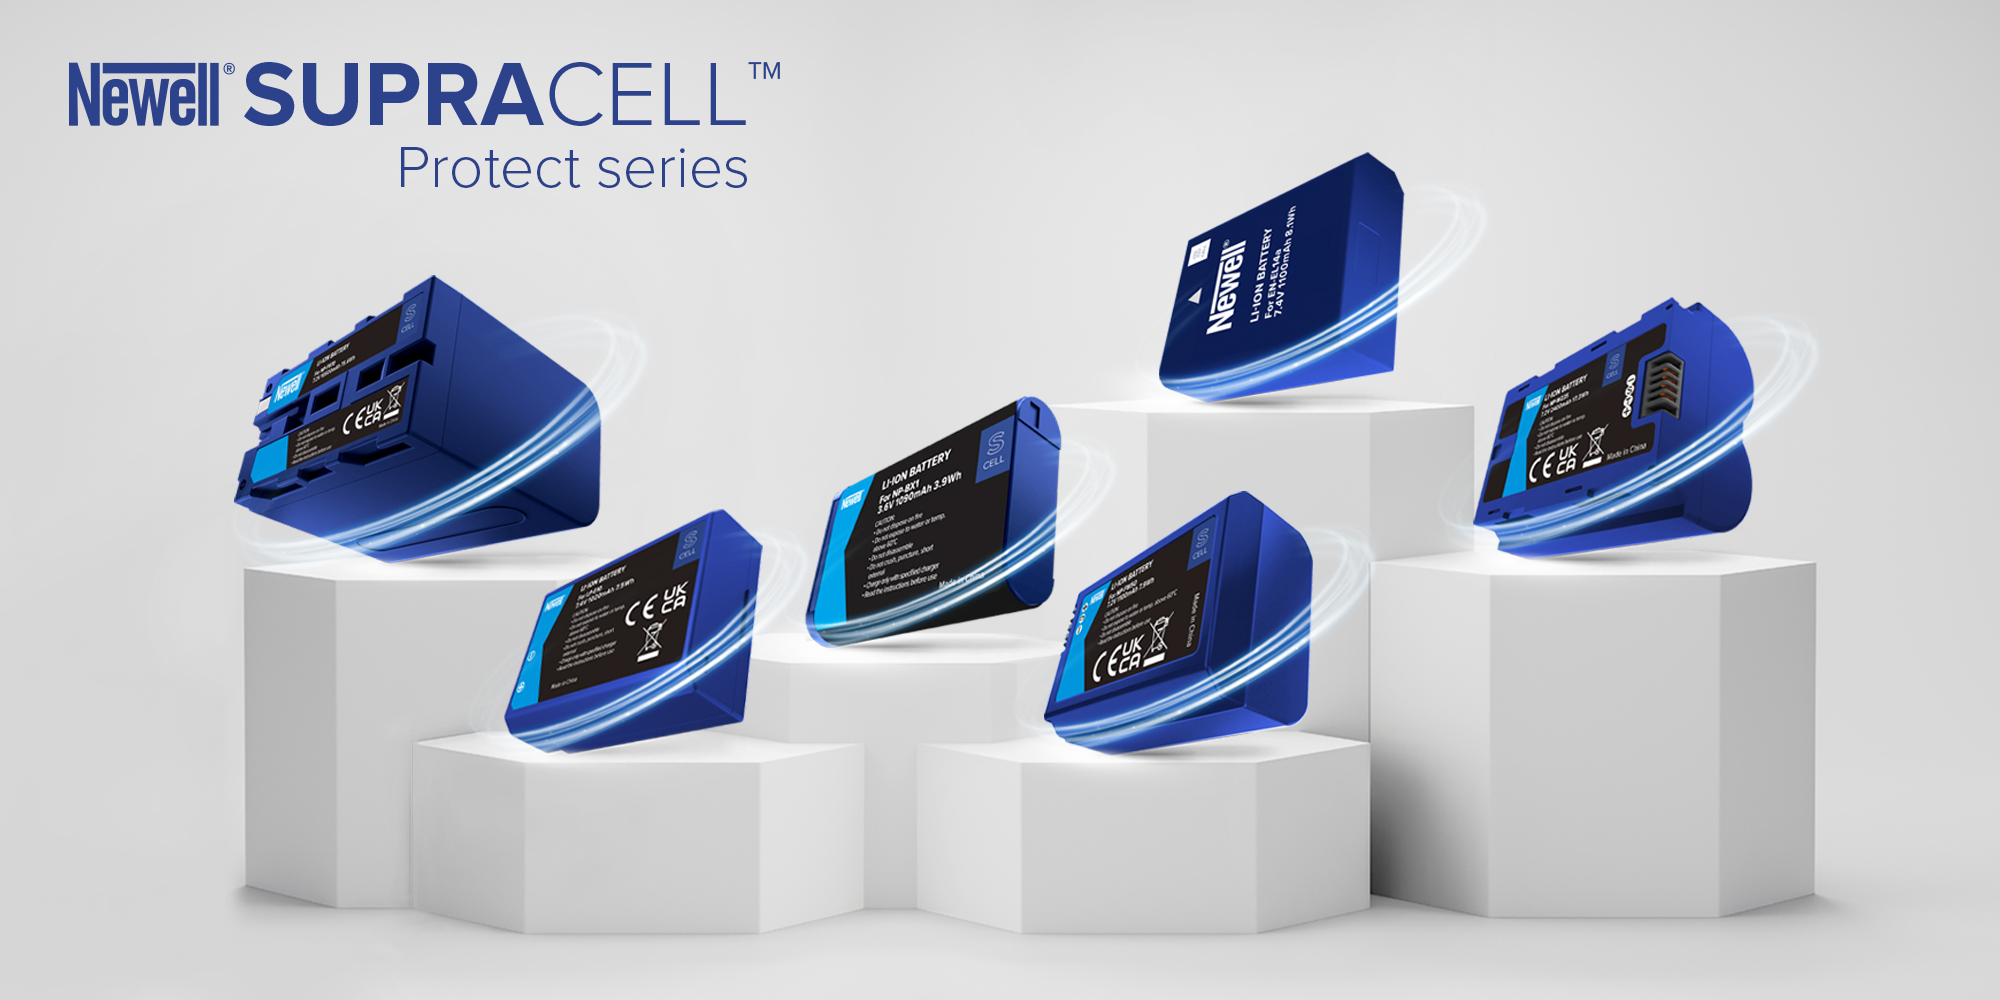 Newell SupraCell Protect series